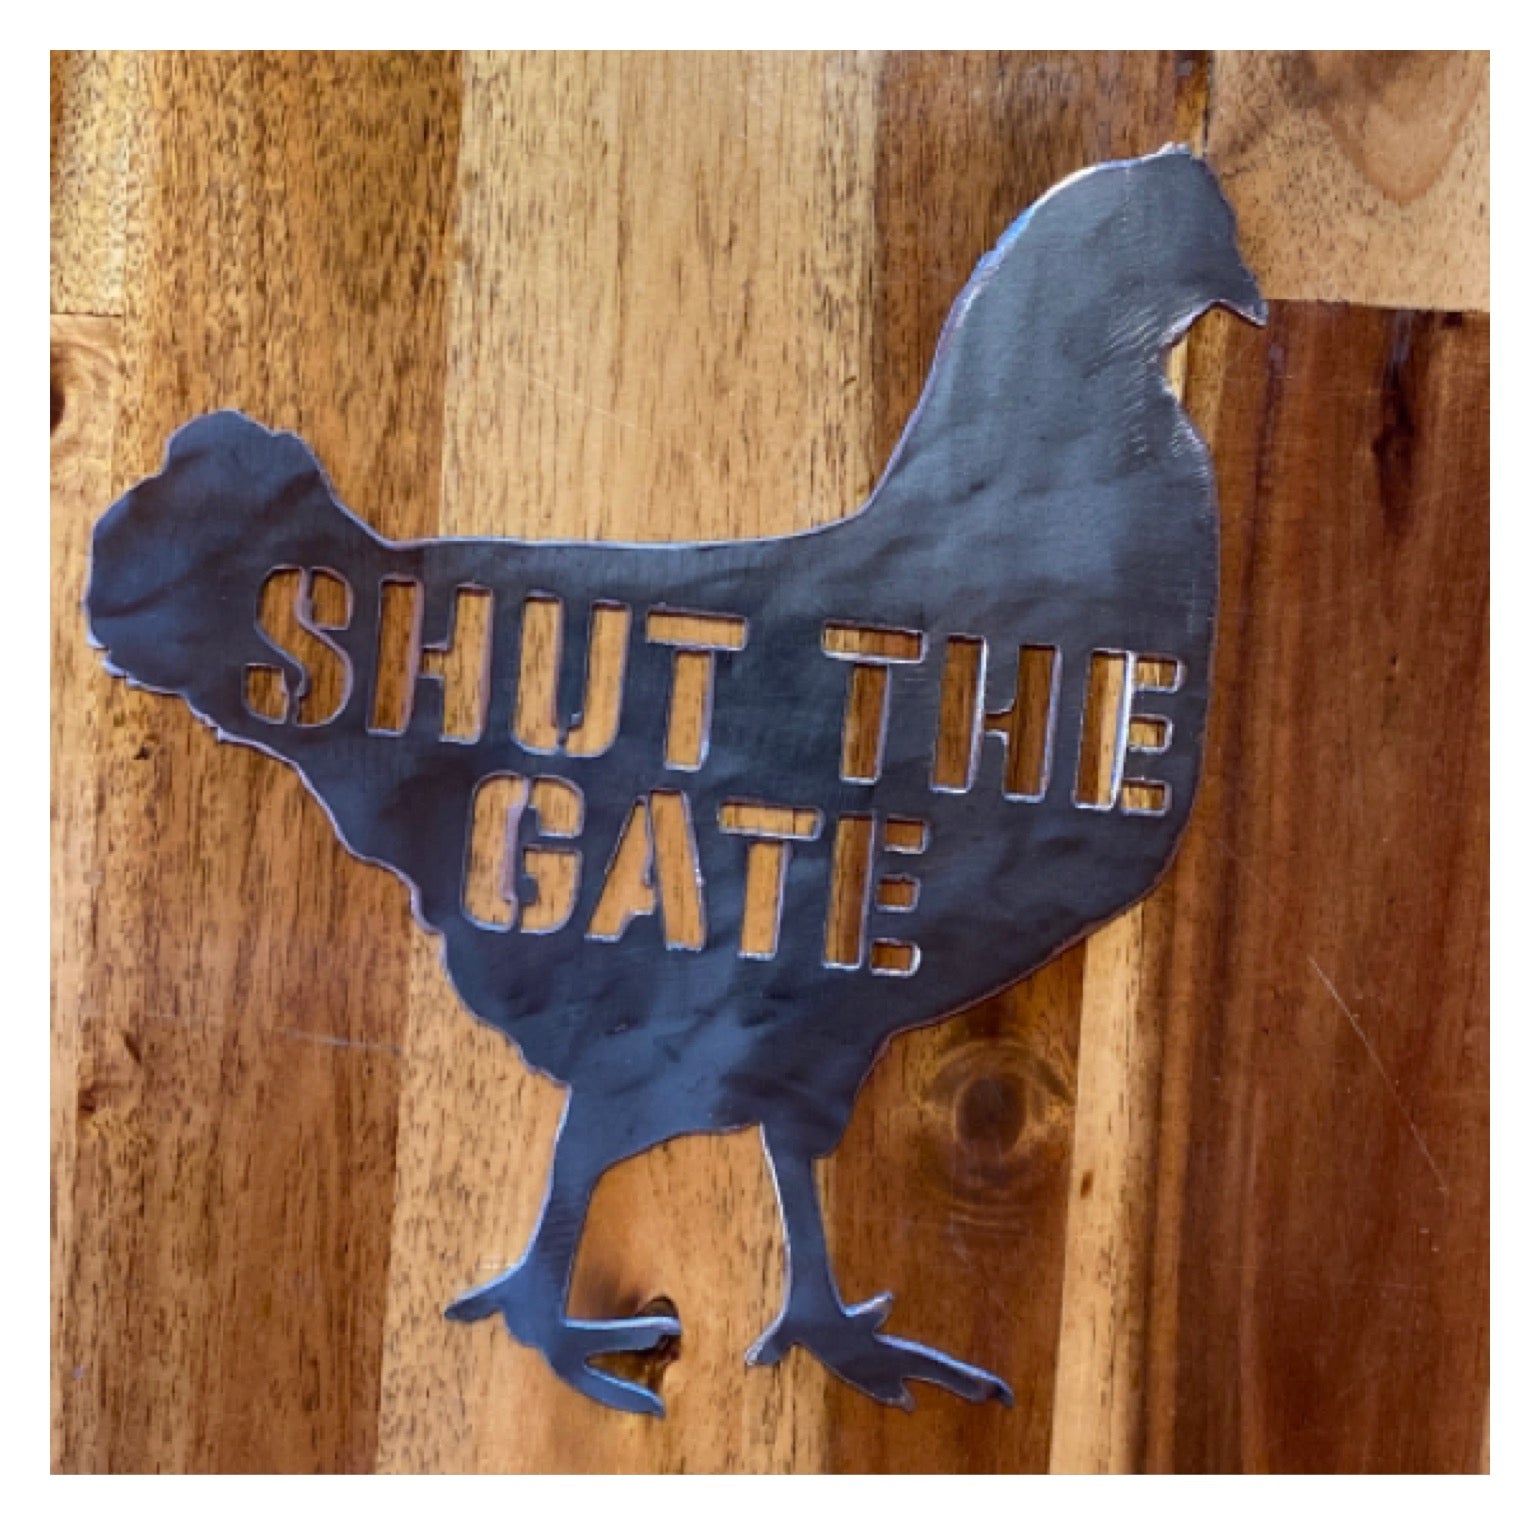 Chicken Shut The Gate Steel Metal Sign - The Renmy Store Homewares & Gifts 